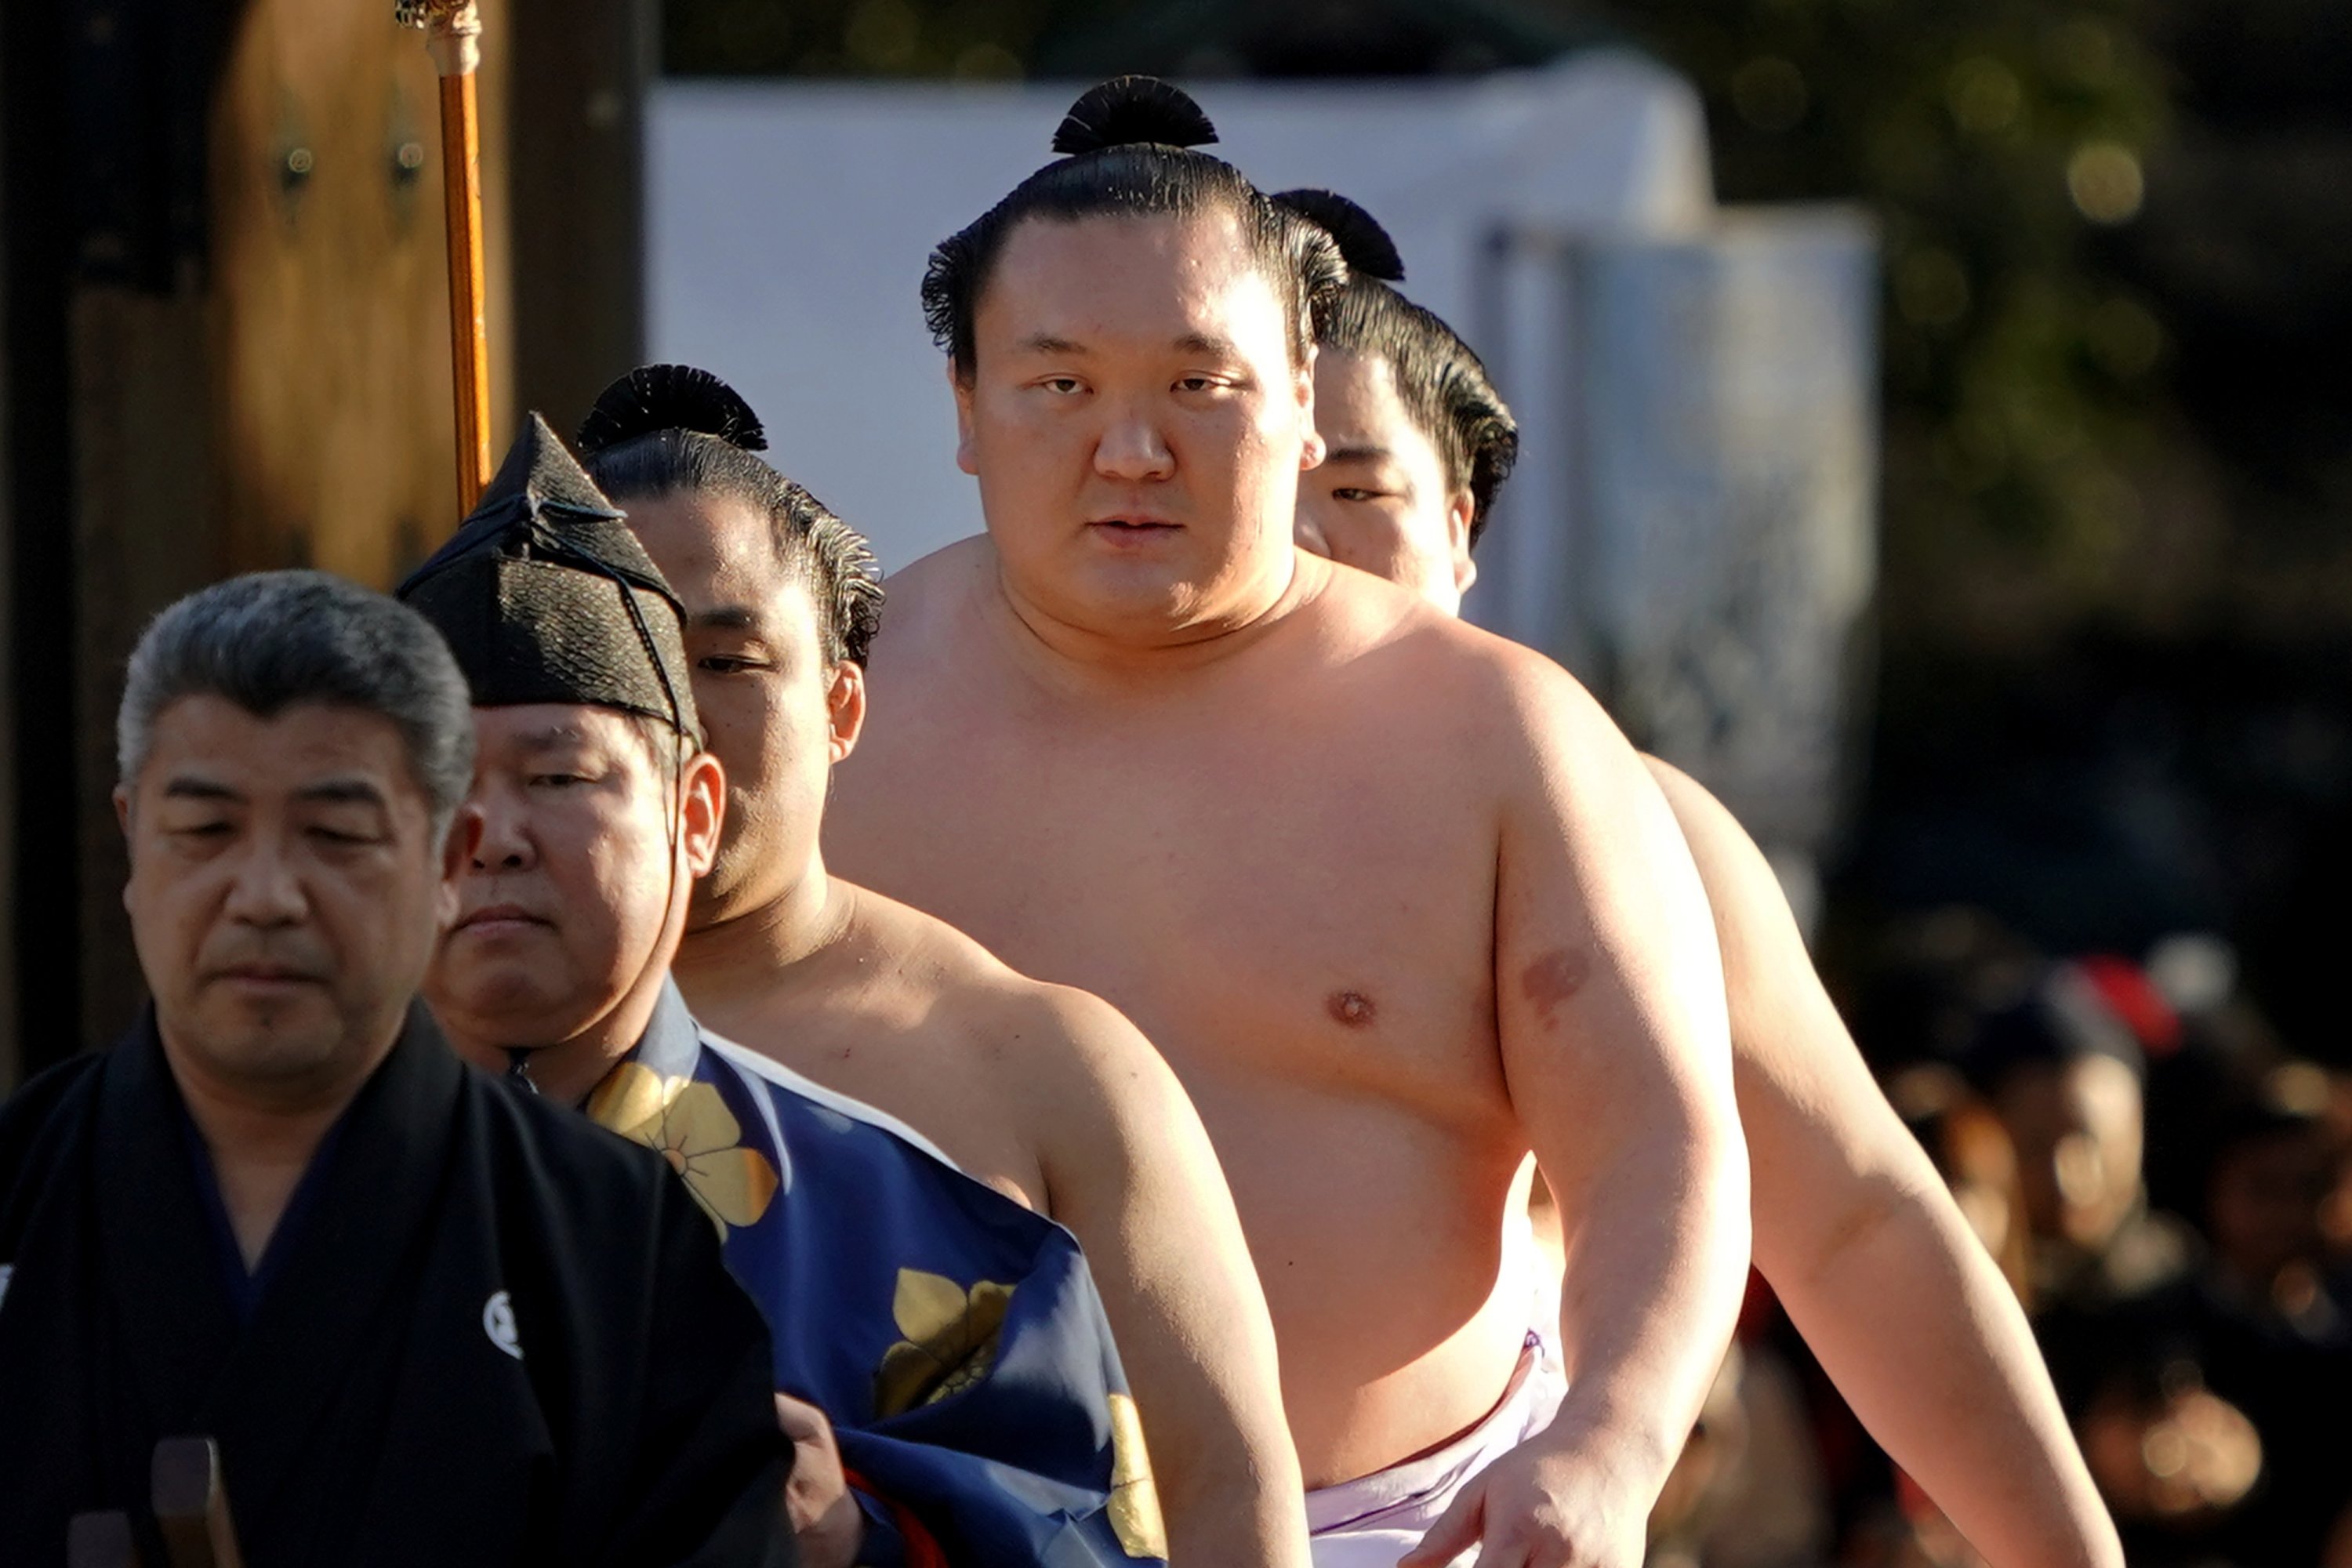 Top-ranked sumo wrestler Hakuho tests positive for COVID-19 | Daily Sabah